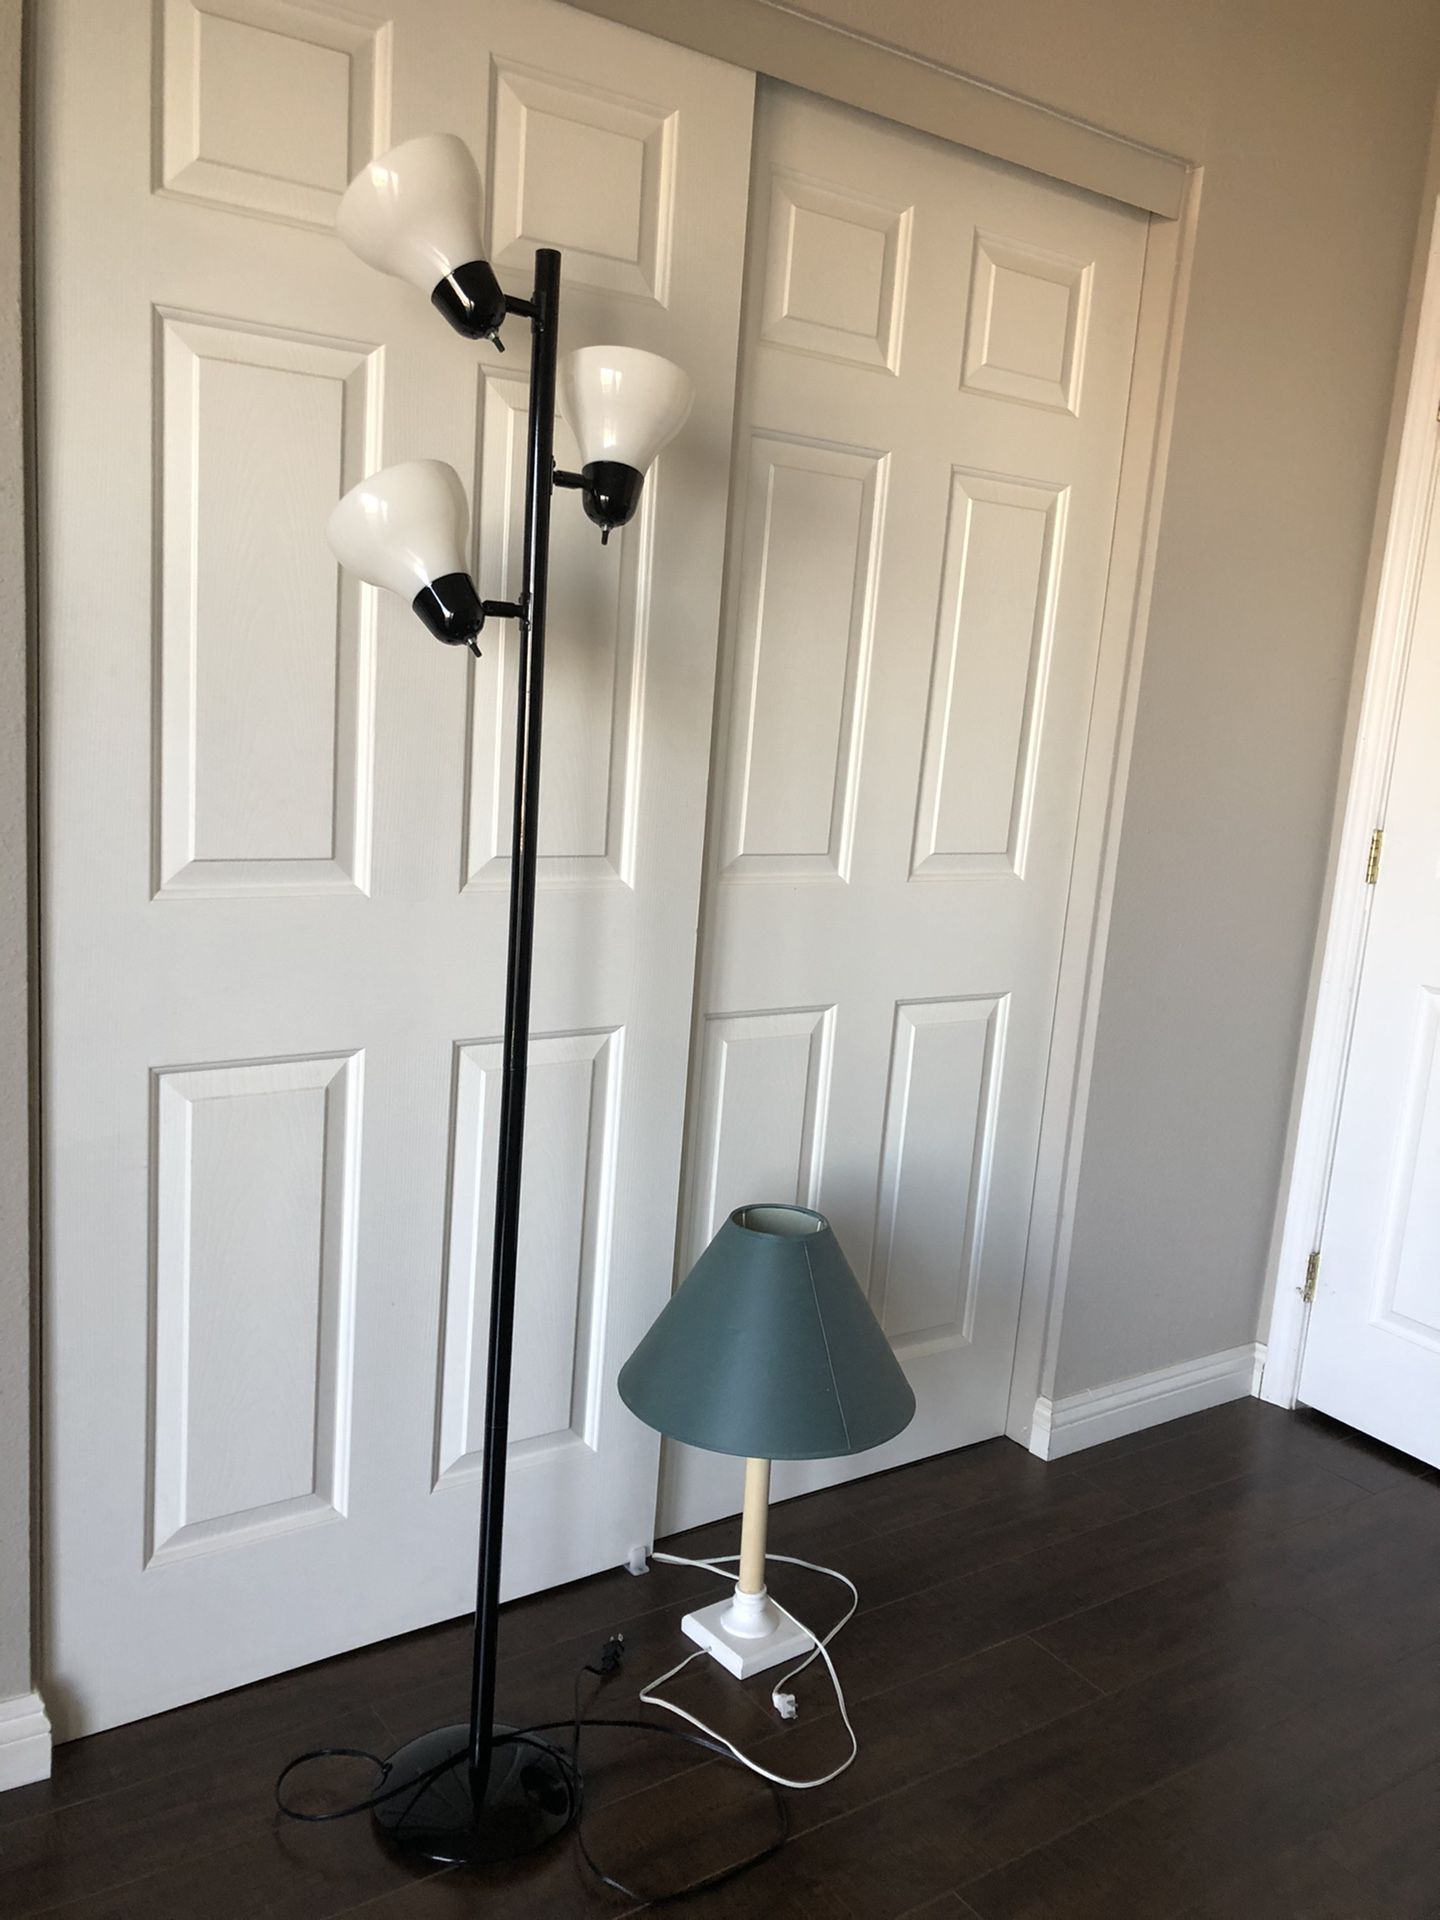 Lamps: floor lamp and table lamp, bulbs included